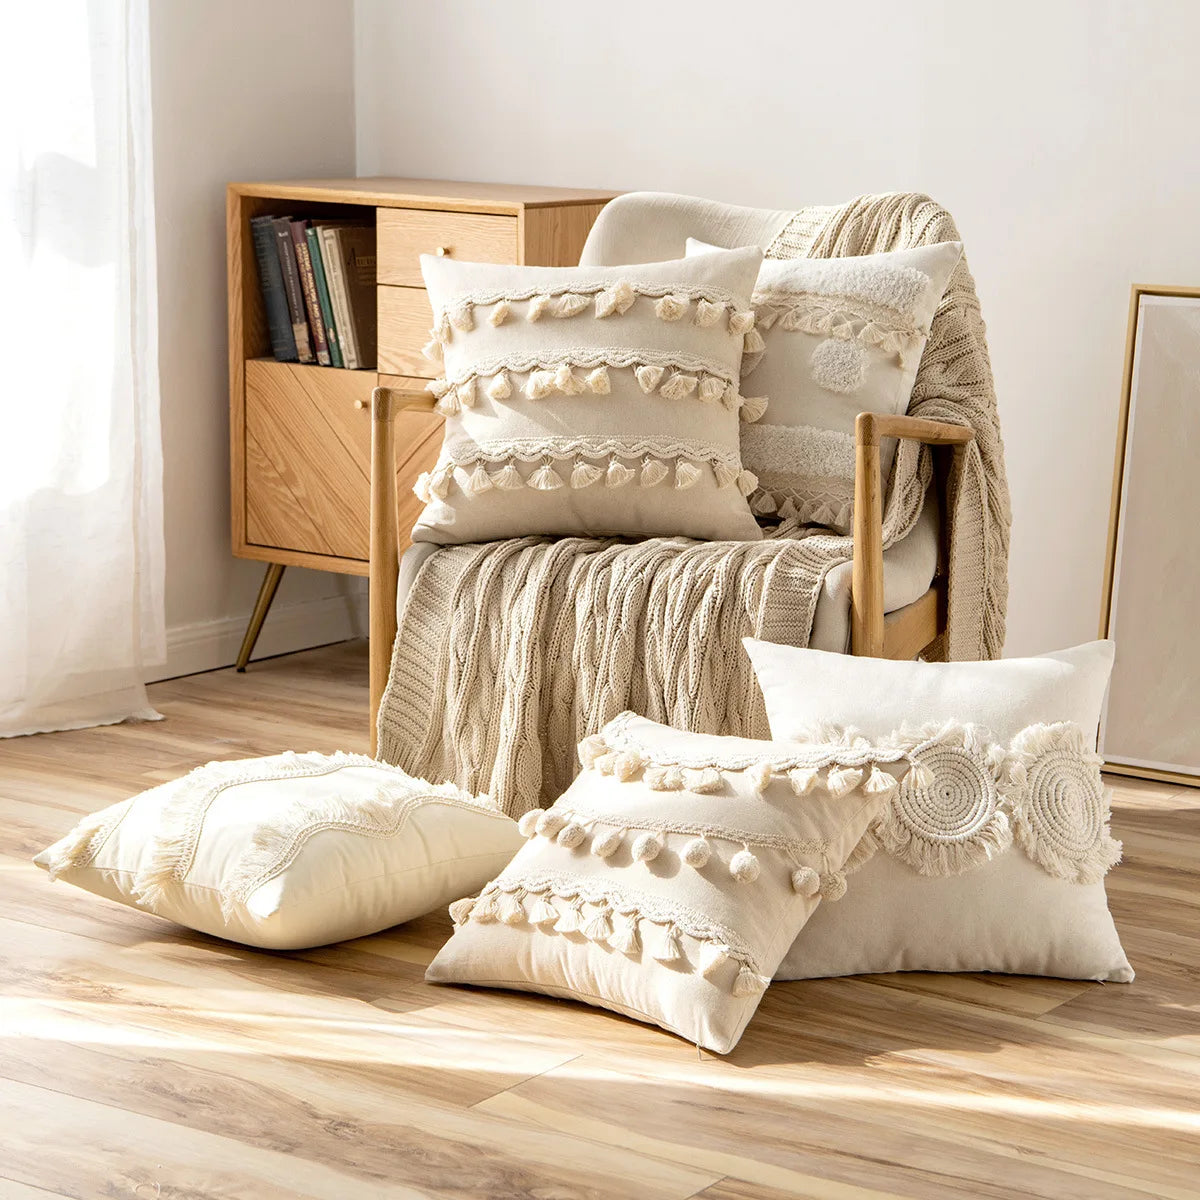 Moroccan Beige Tufted Fringed Cushion Covers